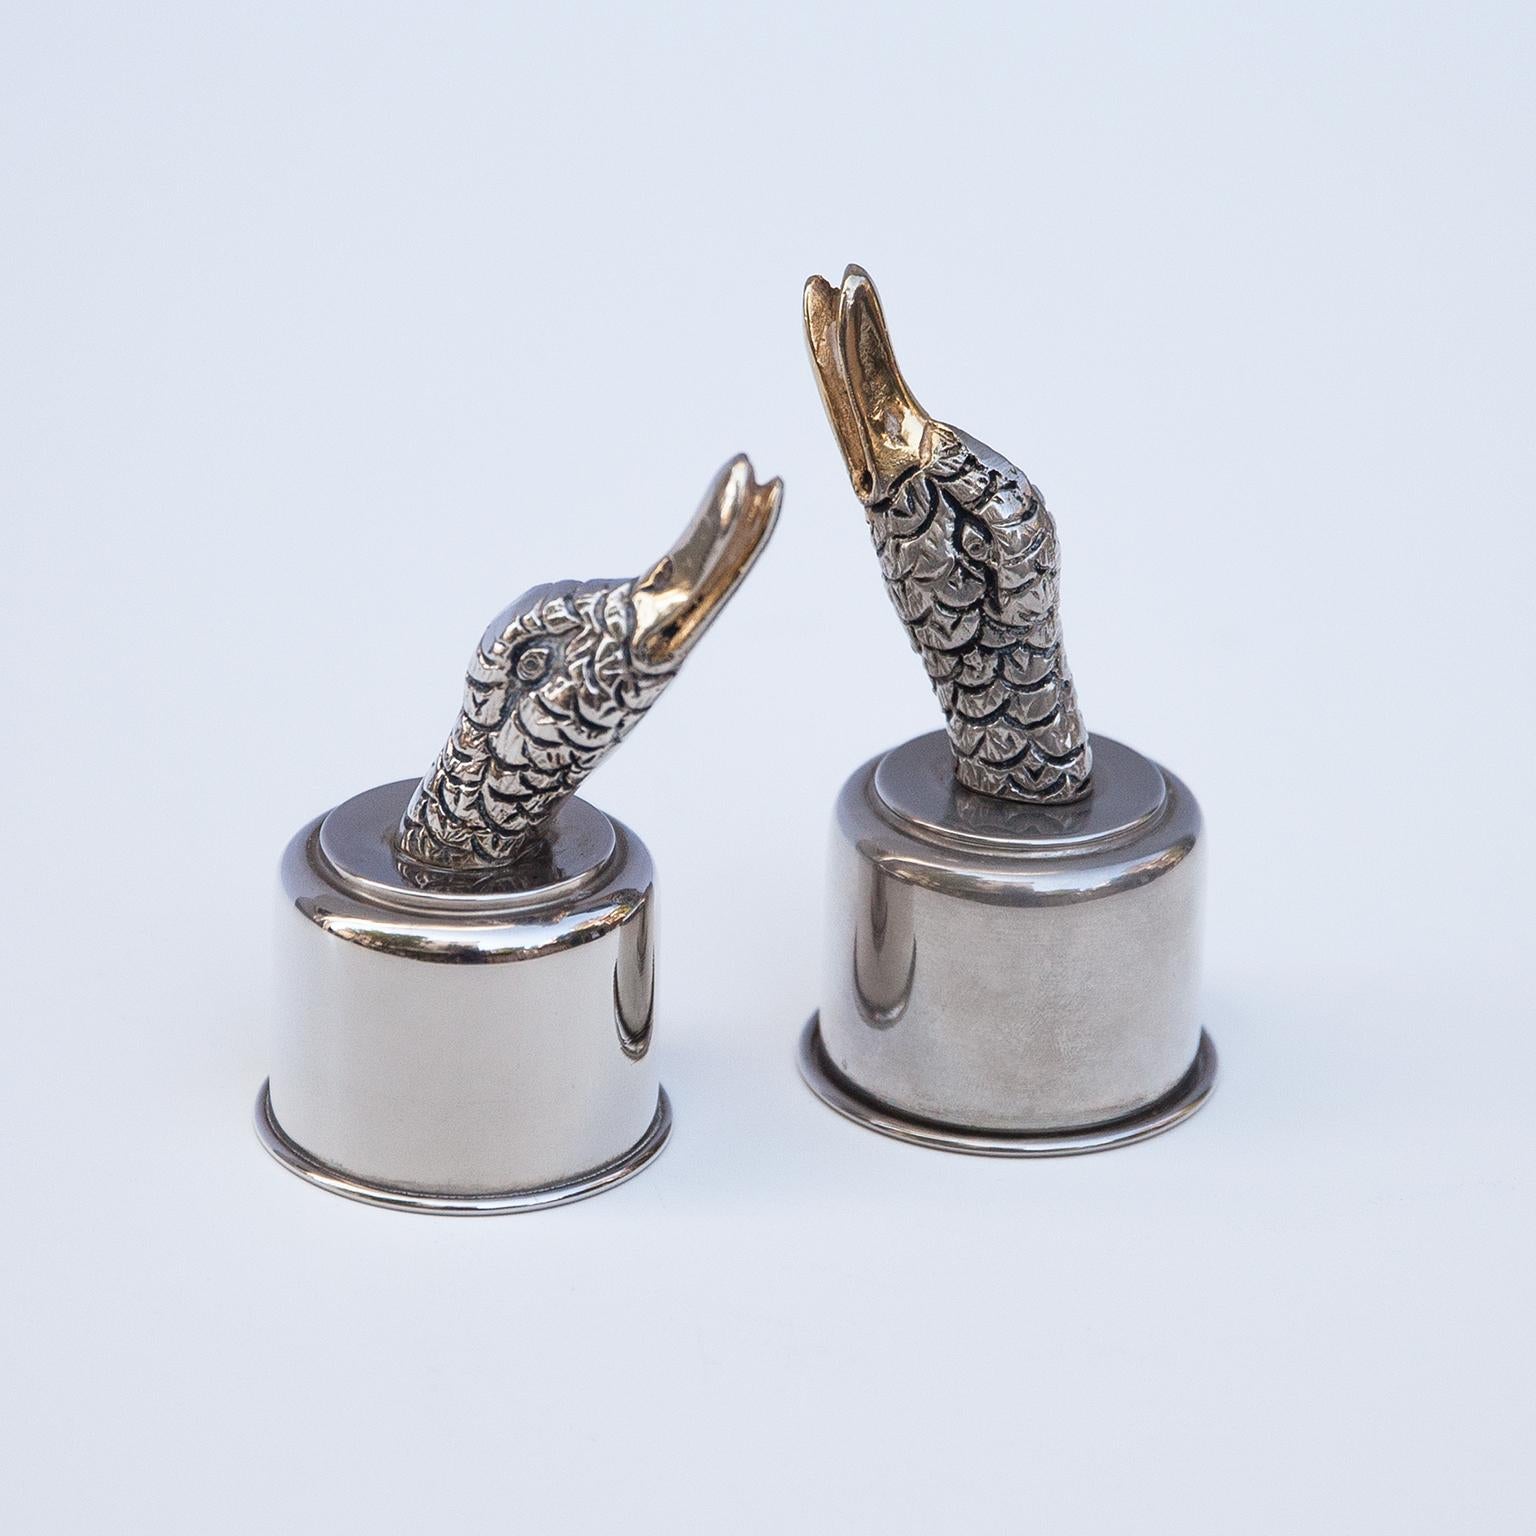 Elegant Gucci bottle caps made in silver and gold plate in form of a duck head, Italy 1970s and signed Gucci.